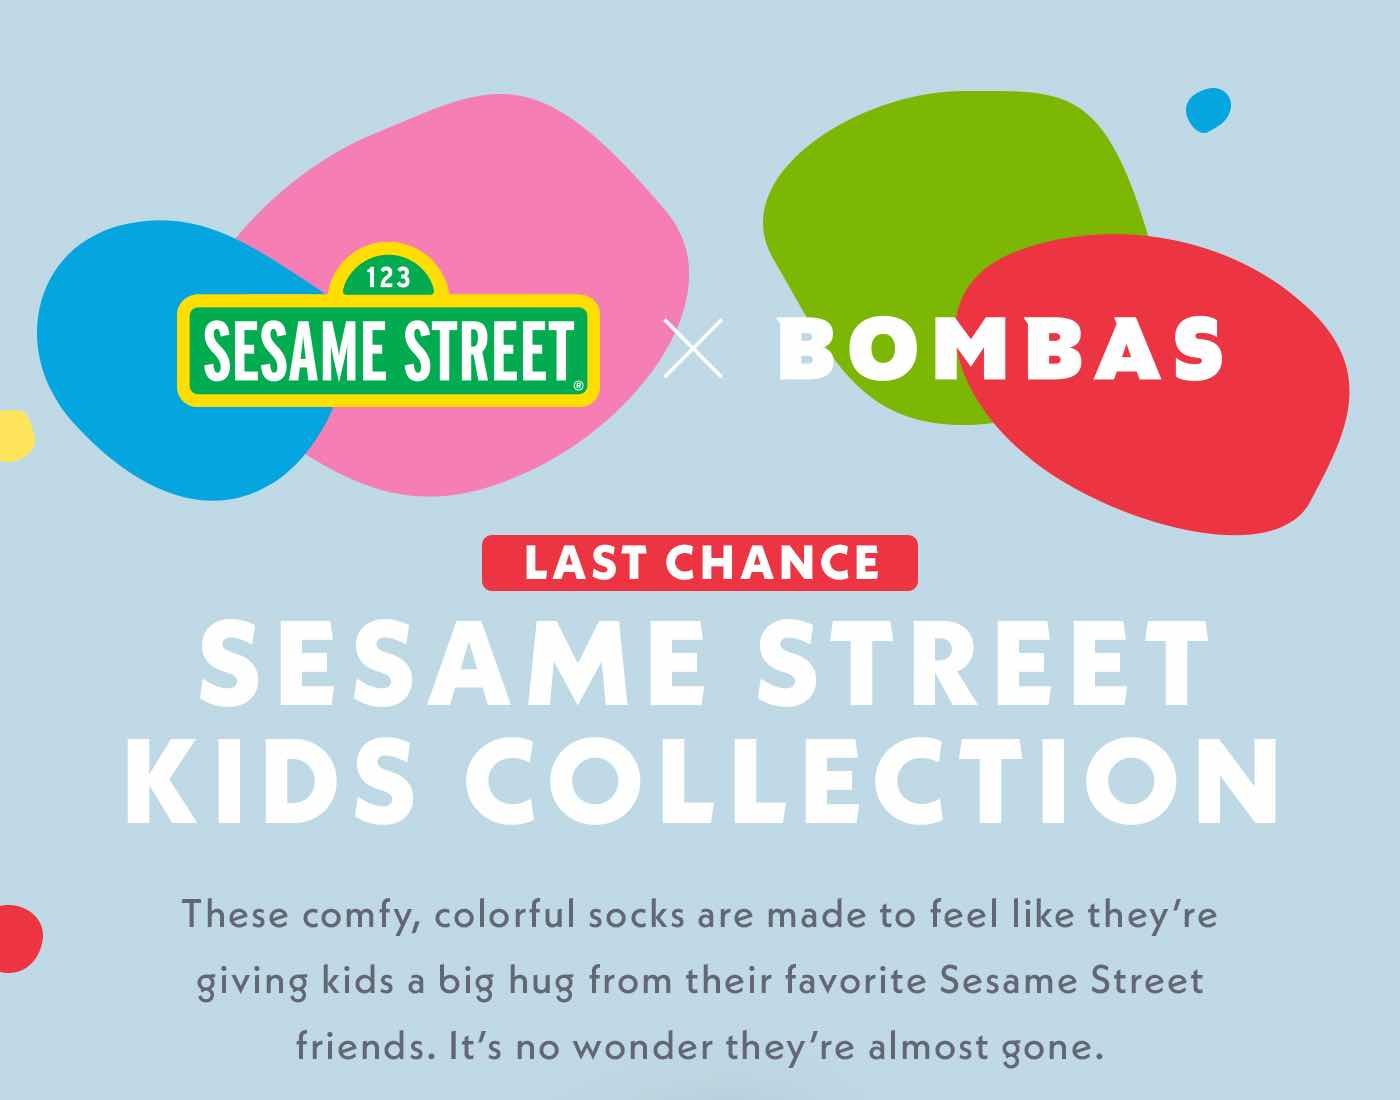 Sesame Street X Bombas. Last chance. Sesame Street Kids Collection. These comfy, colorful socks are made to feel like they're giving kids a big hug from their favorite Sesame Street friends. It's no wonder why they're almost gone.